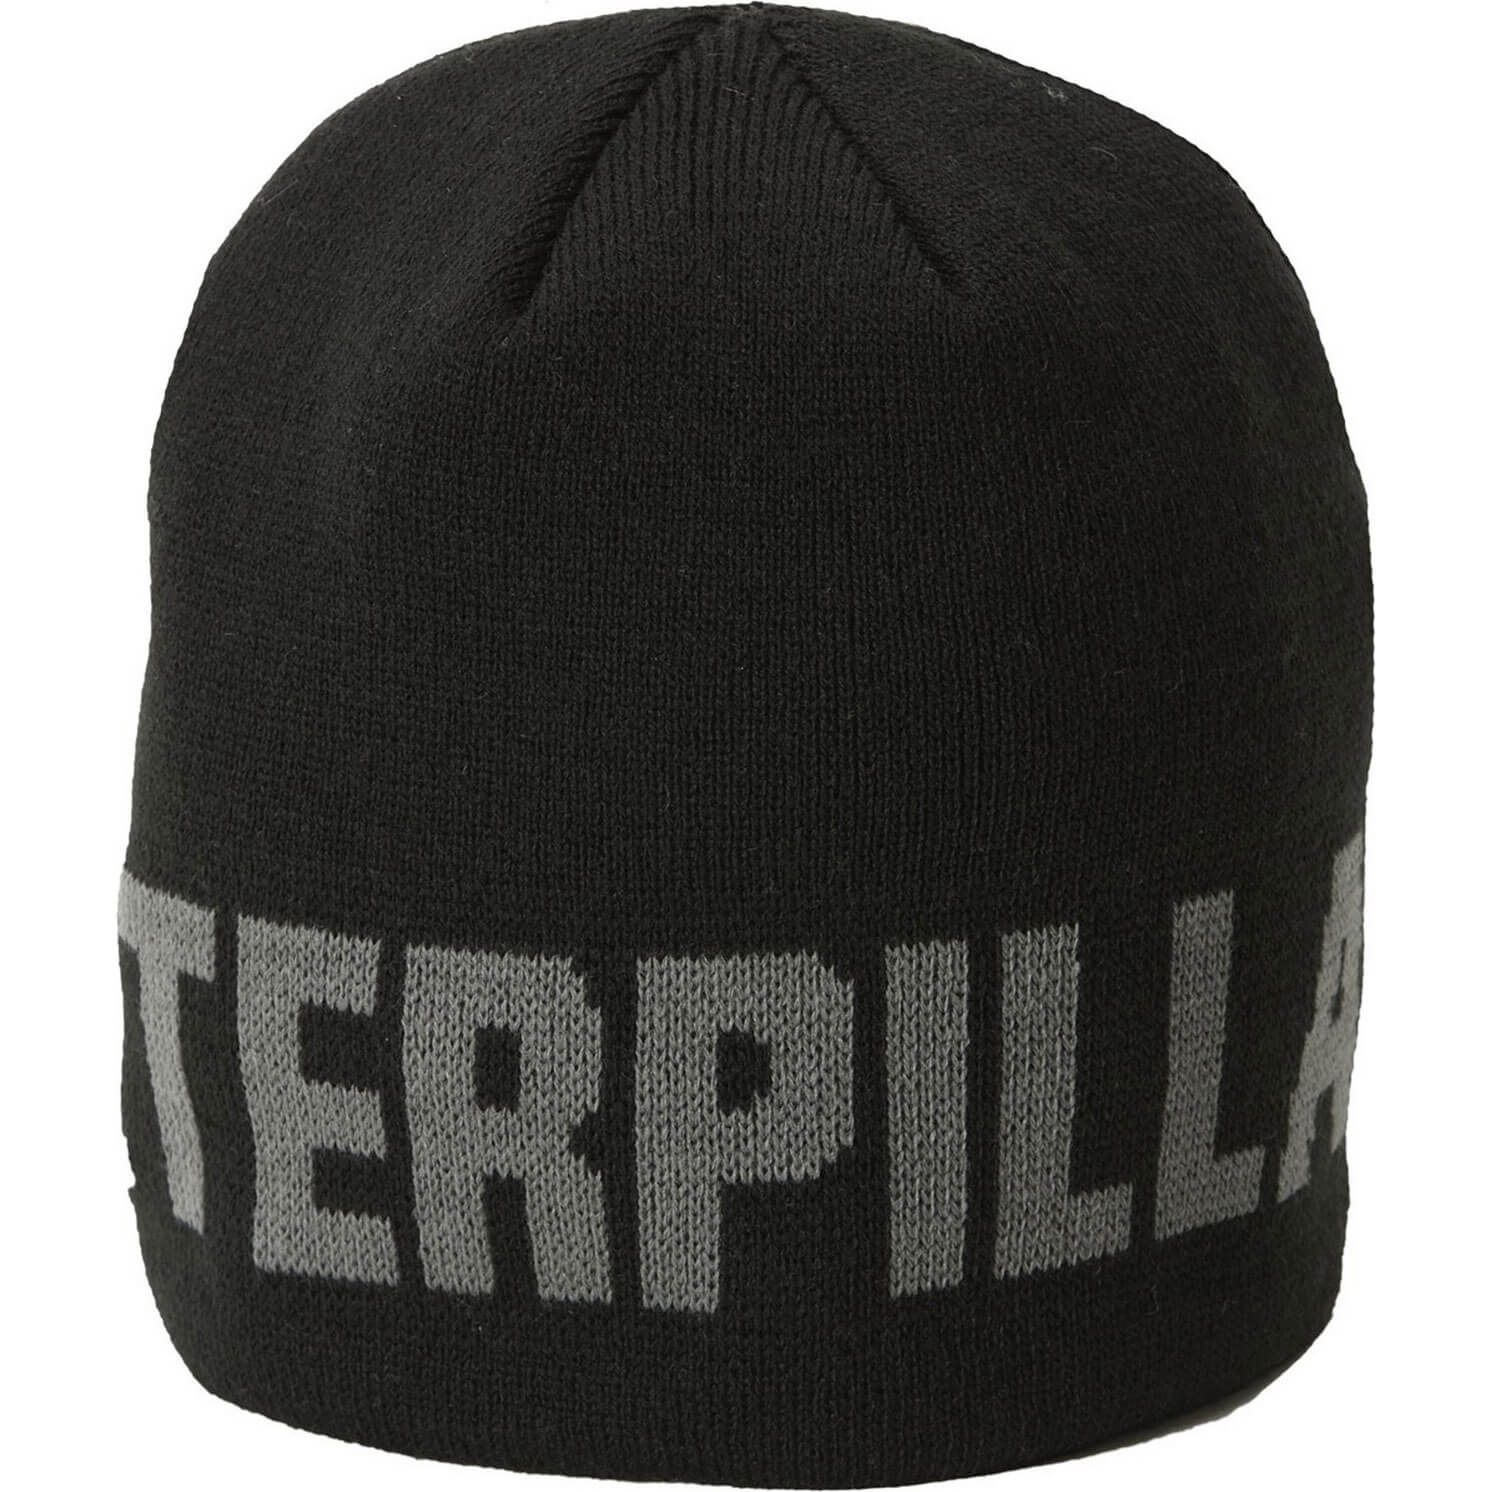 Image of Caterpillar Branded Beanie Cap Black One Size